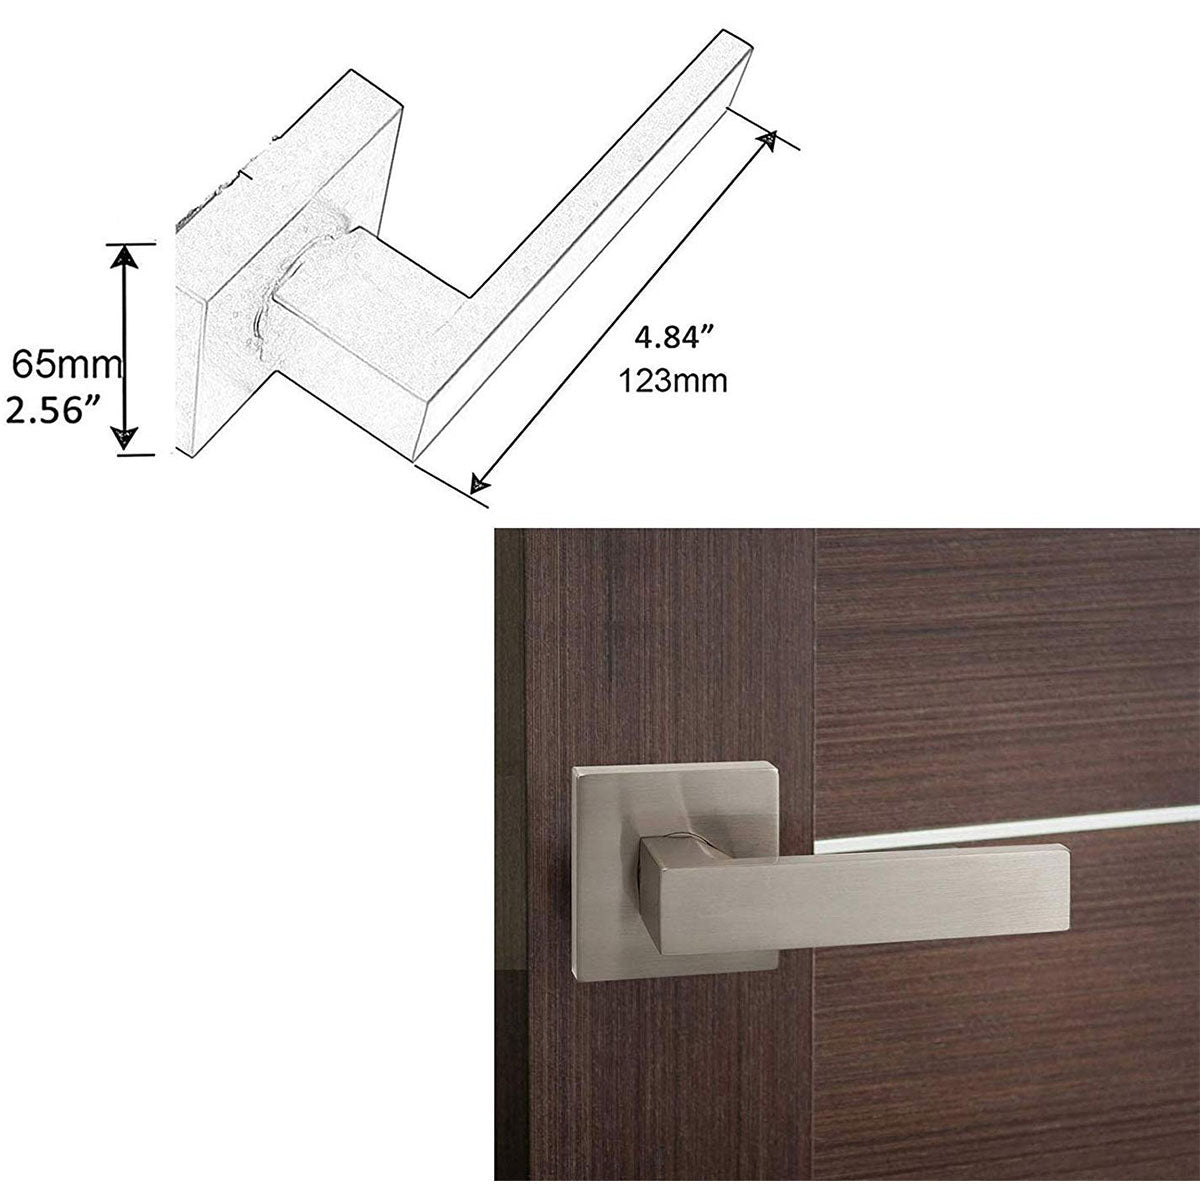 Single Dummy Door Lever Handle with Square Rosette, Brushed Nickel Finish DL01SNDM